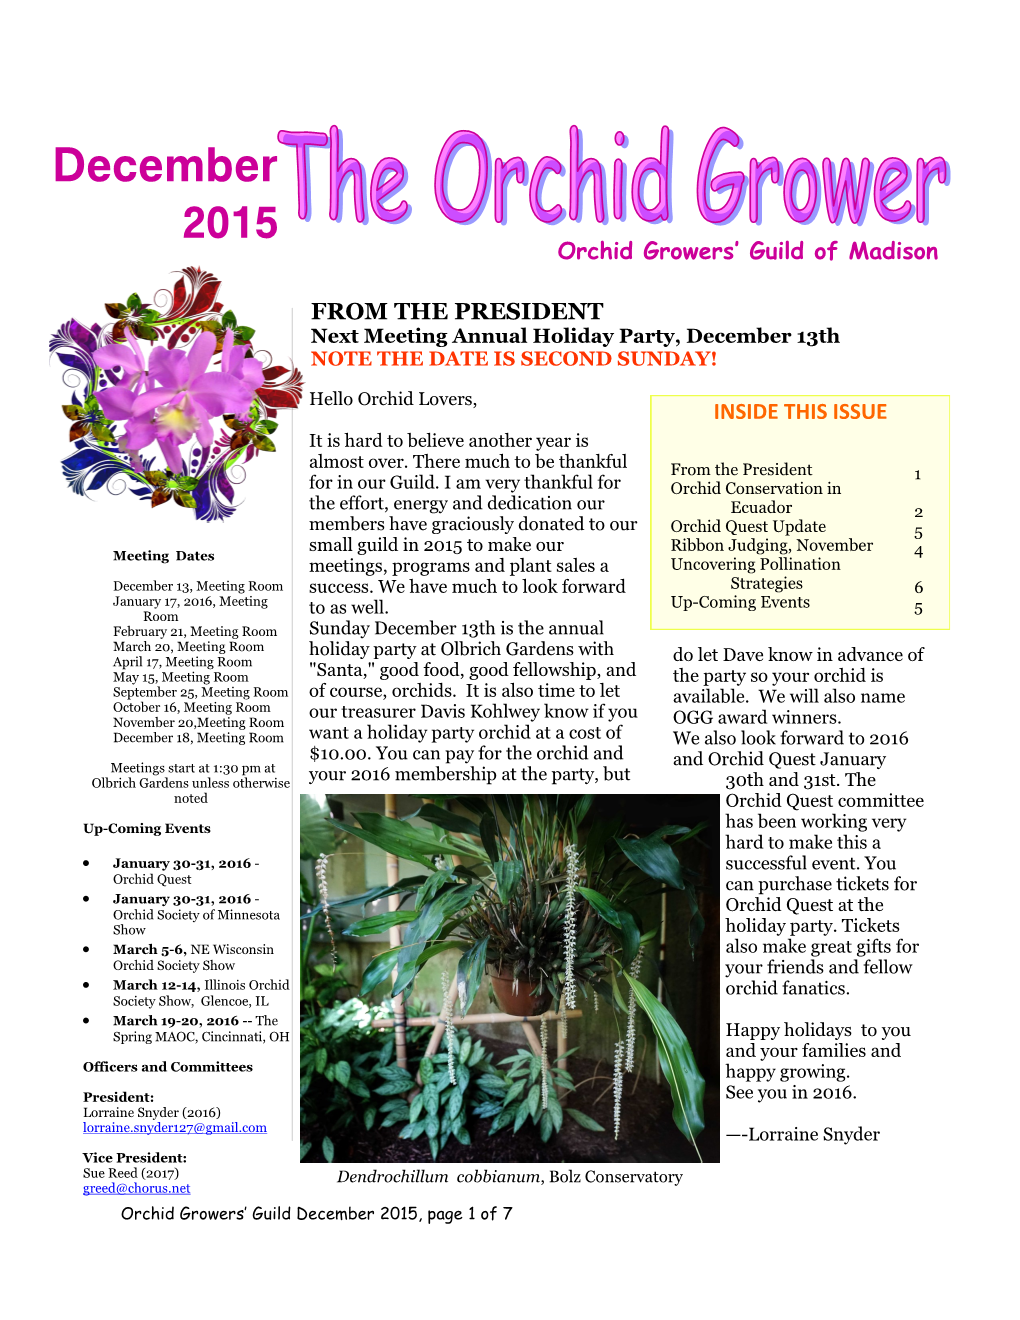 December 2015 Orchid Growers’ Guild of Madison